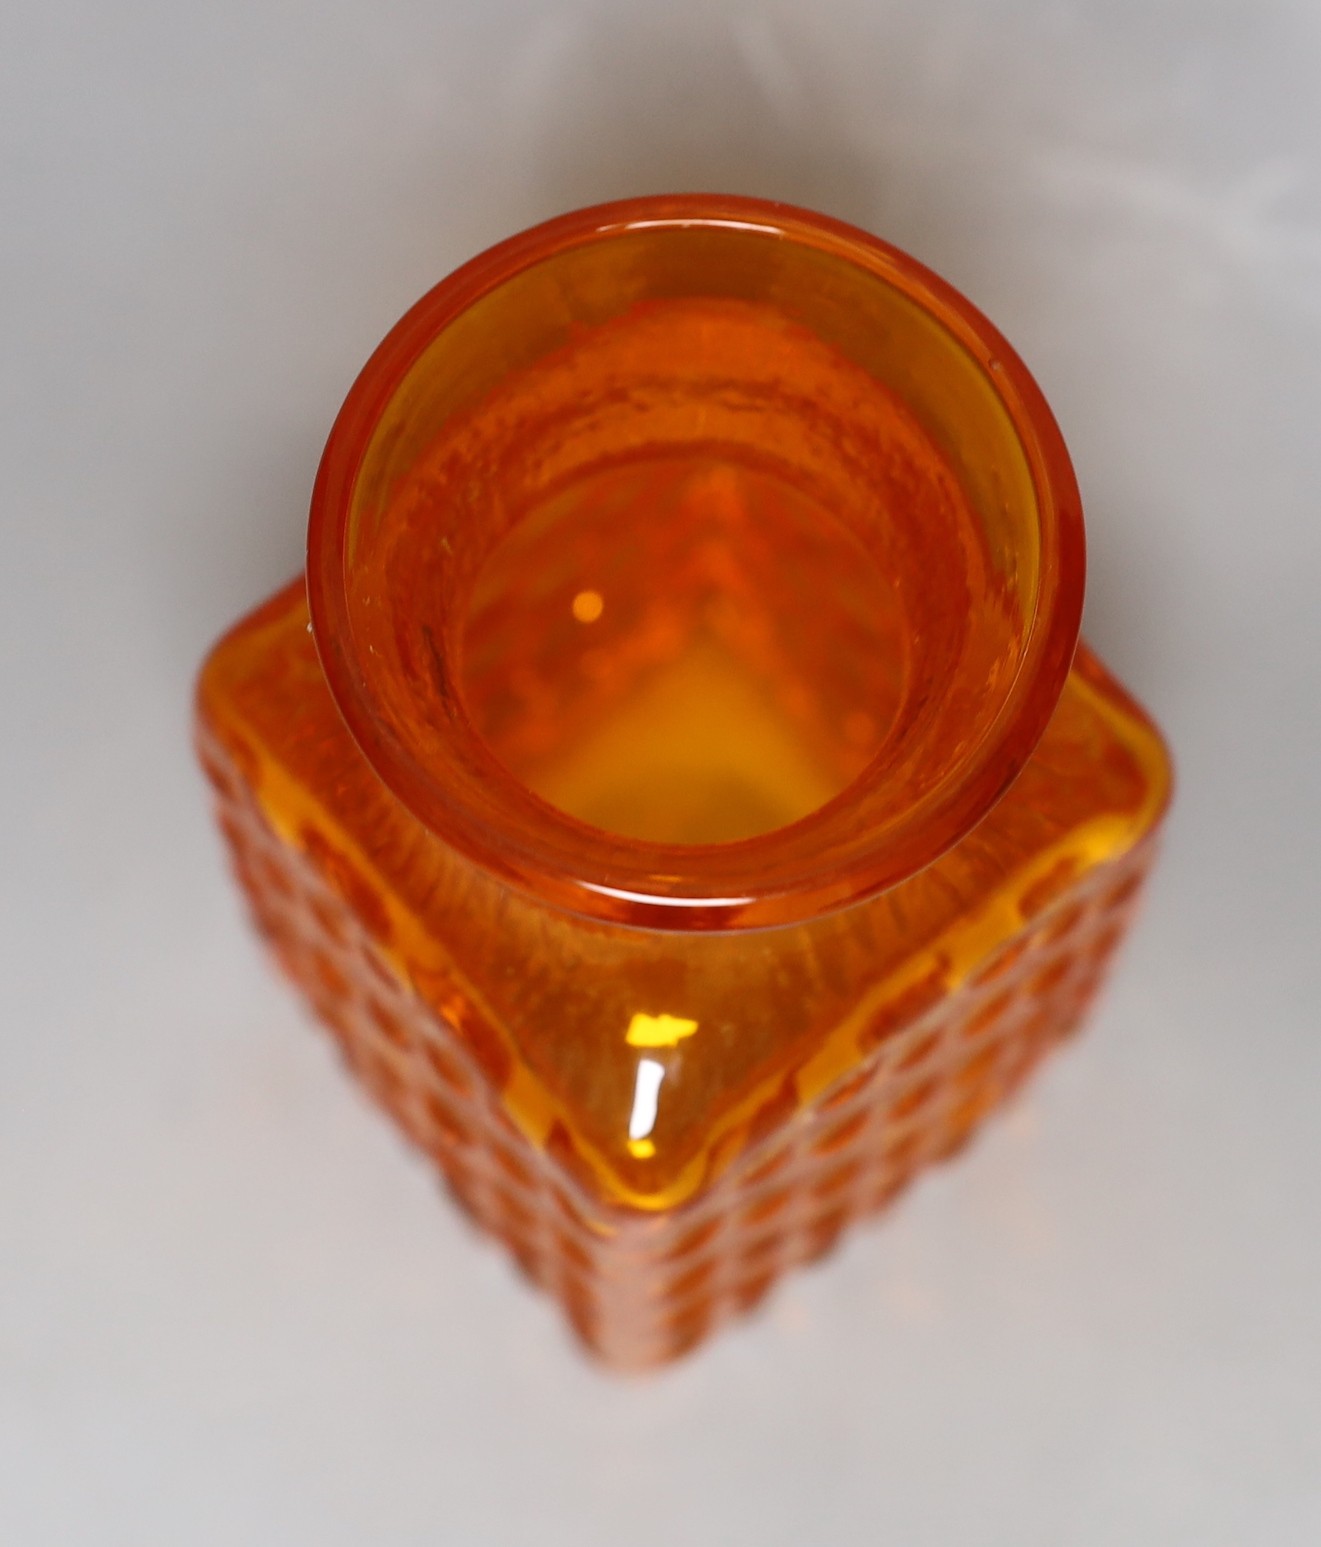 A Whitefriars 'Chess' glass vase, designed by Geoffrey Baxter, pattern number 9817, tangerine glass, 15cm tall